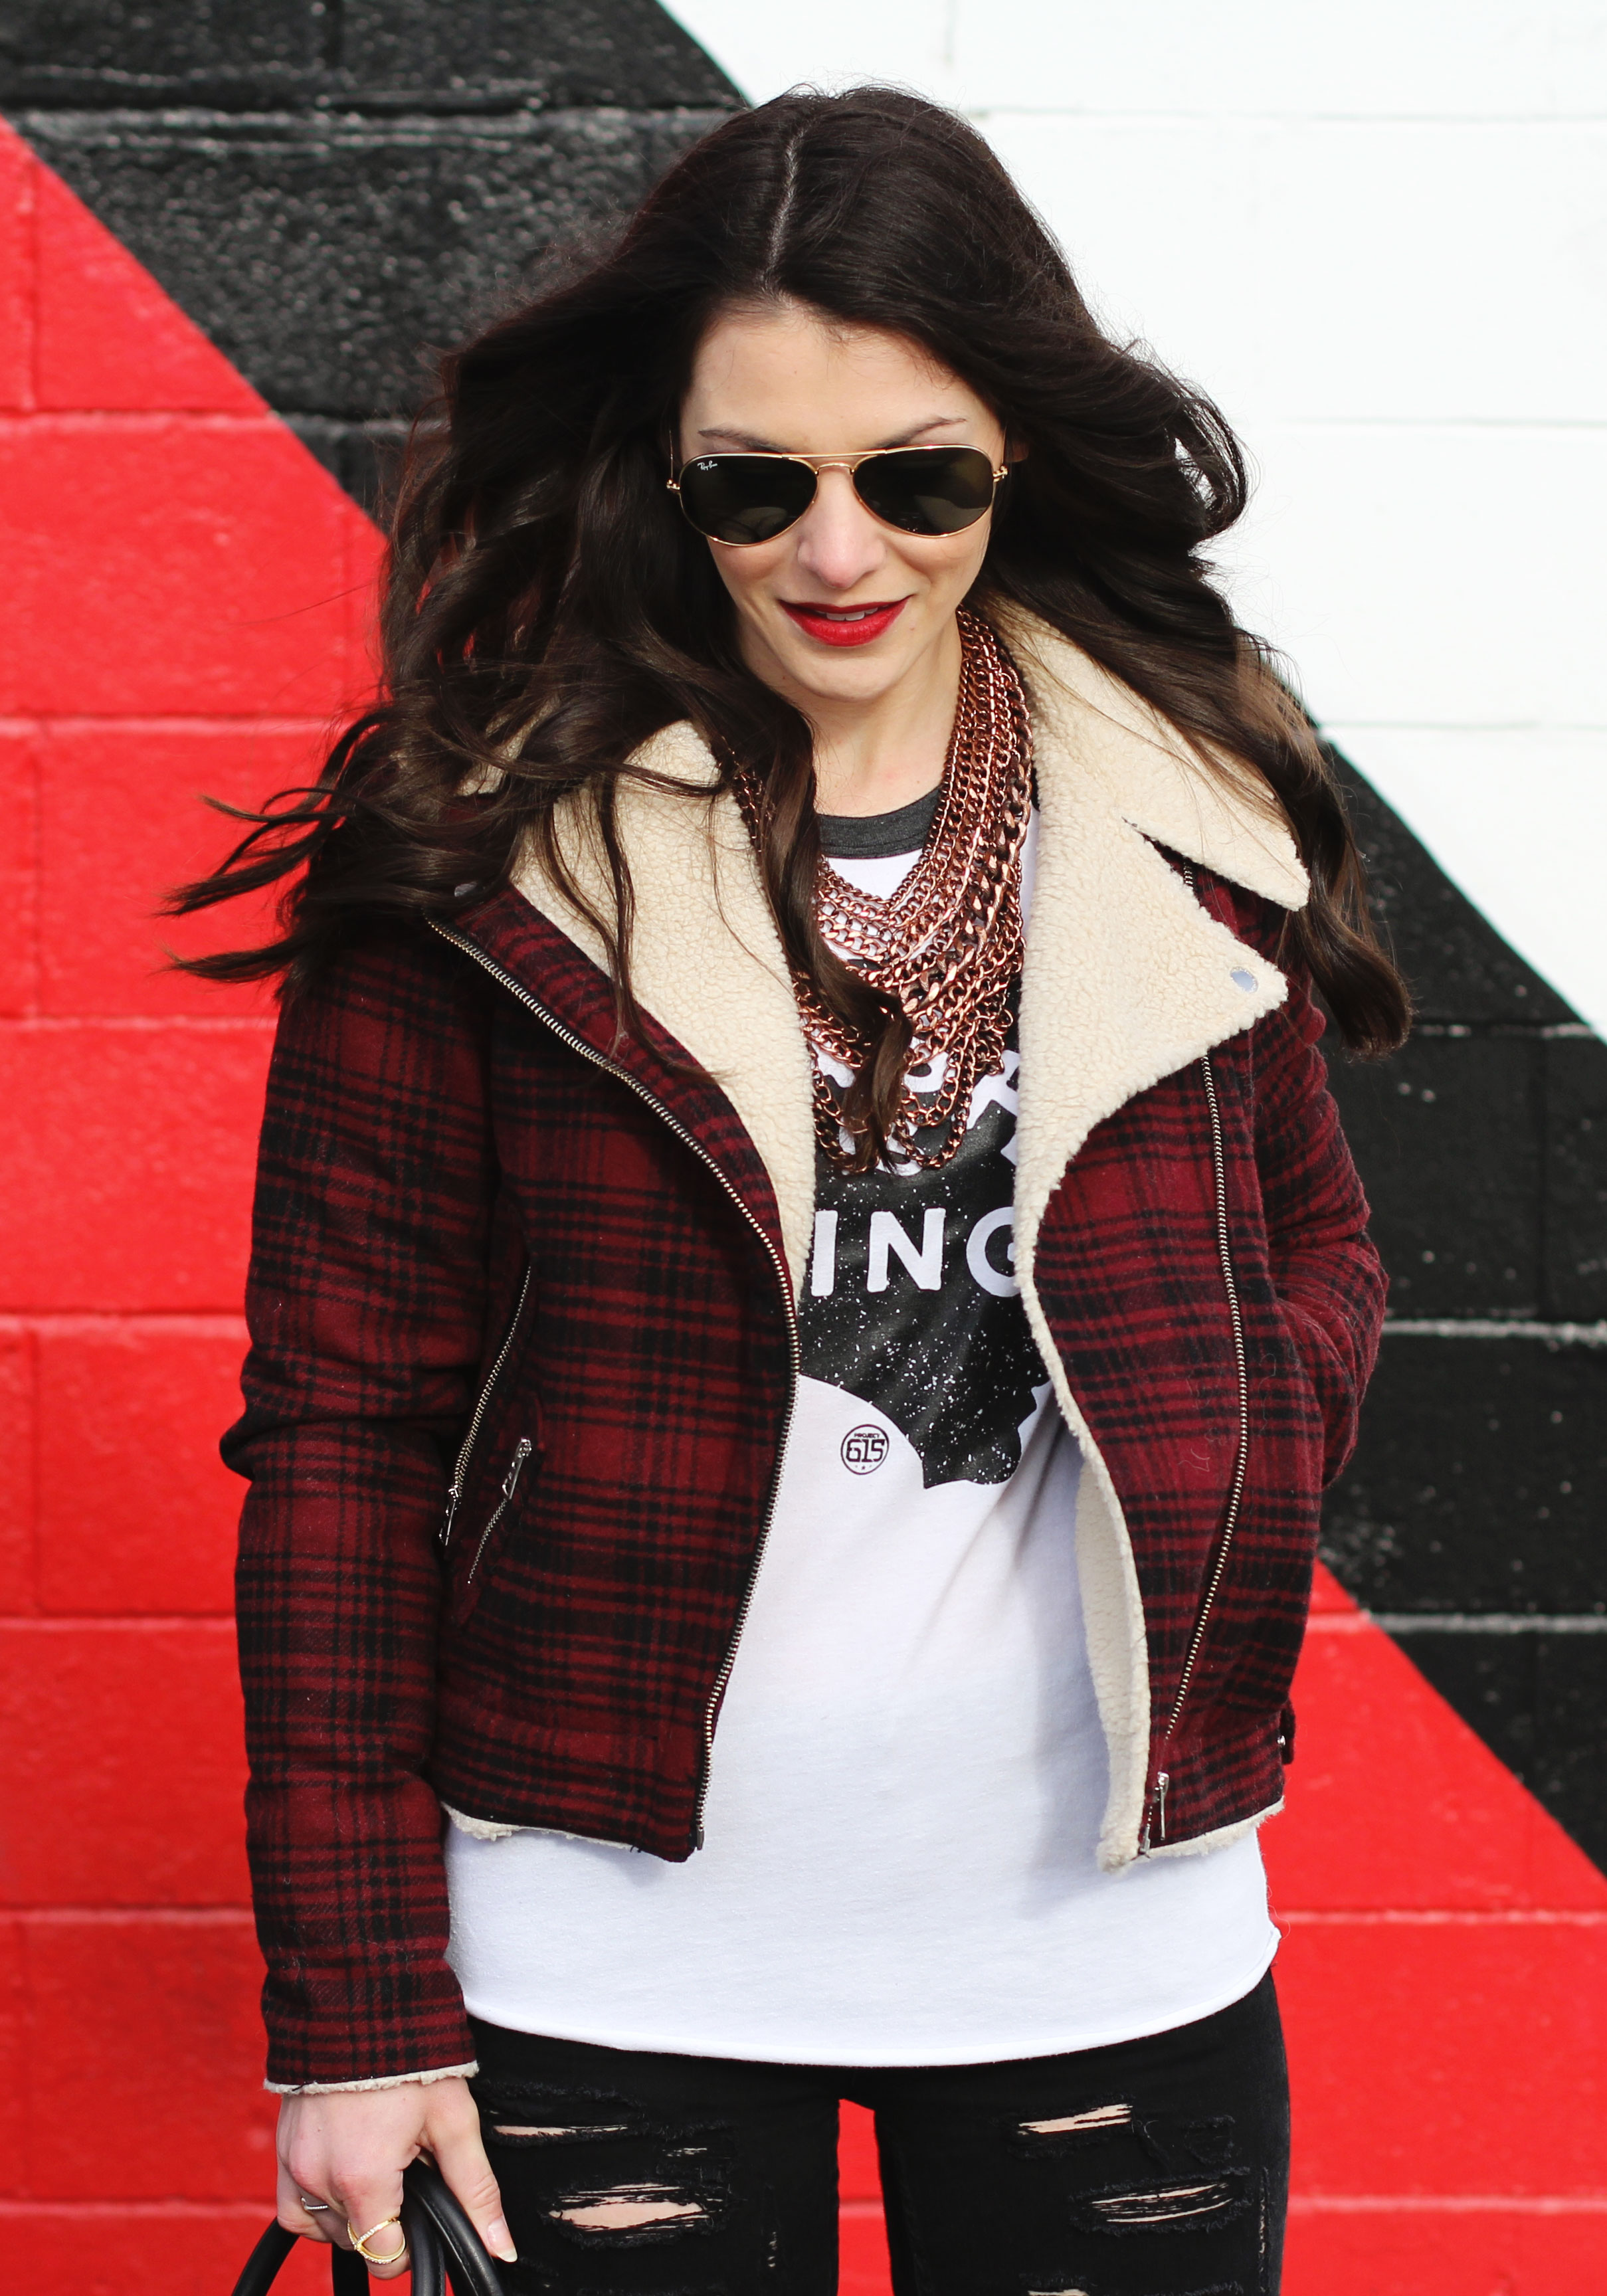 Winter OOTD, Plaid Moto Jacket, Johnny Cash Tee, Ripped Skinny Jeans, Steve Madden 'Gorgeous' Over The Knee Boots, Rebecca Minkoff 'Mini Perry' Satchel, Ray-Ban Aviators, Baublebar 'Courtney' Necklace